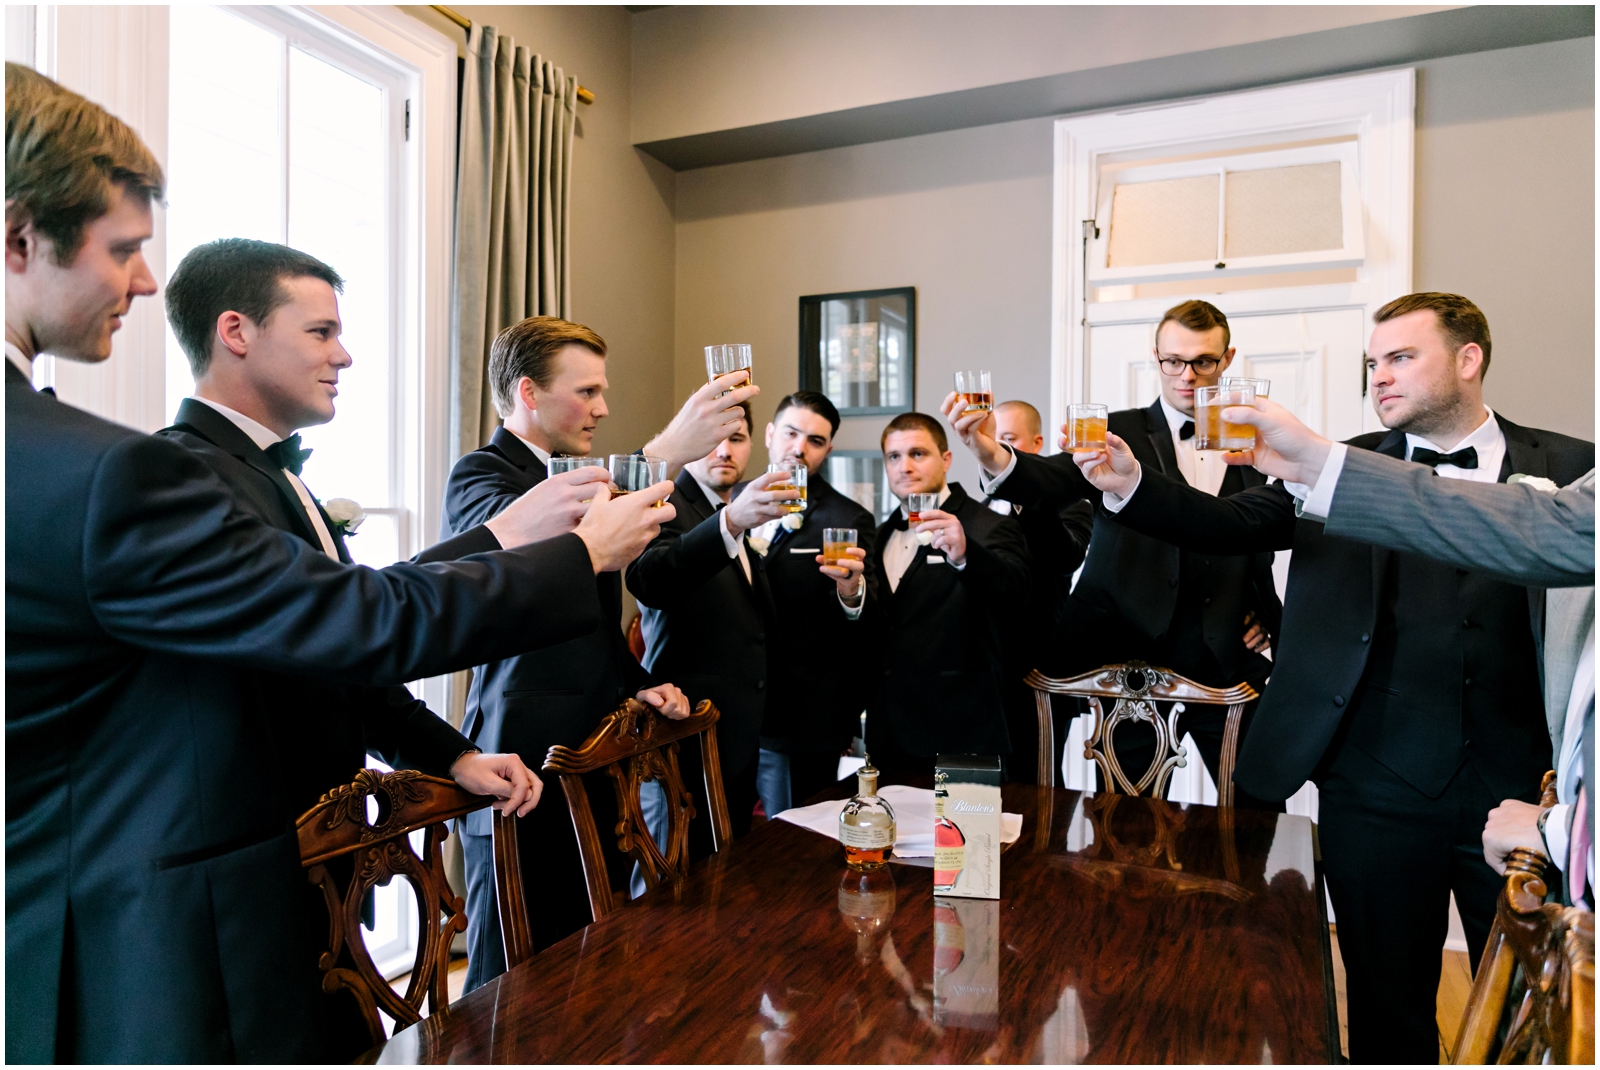  Groomsmen and groom making a toast before the wedding 